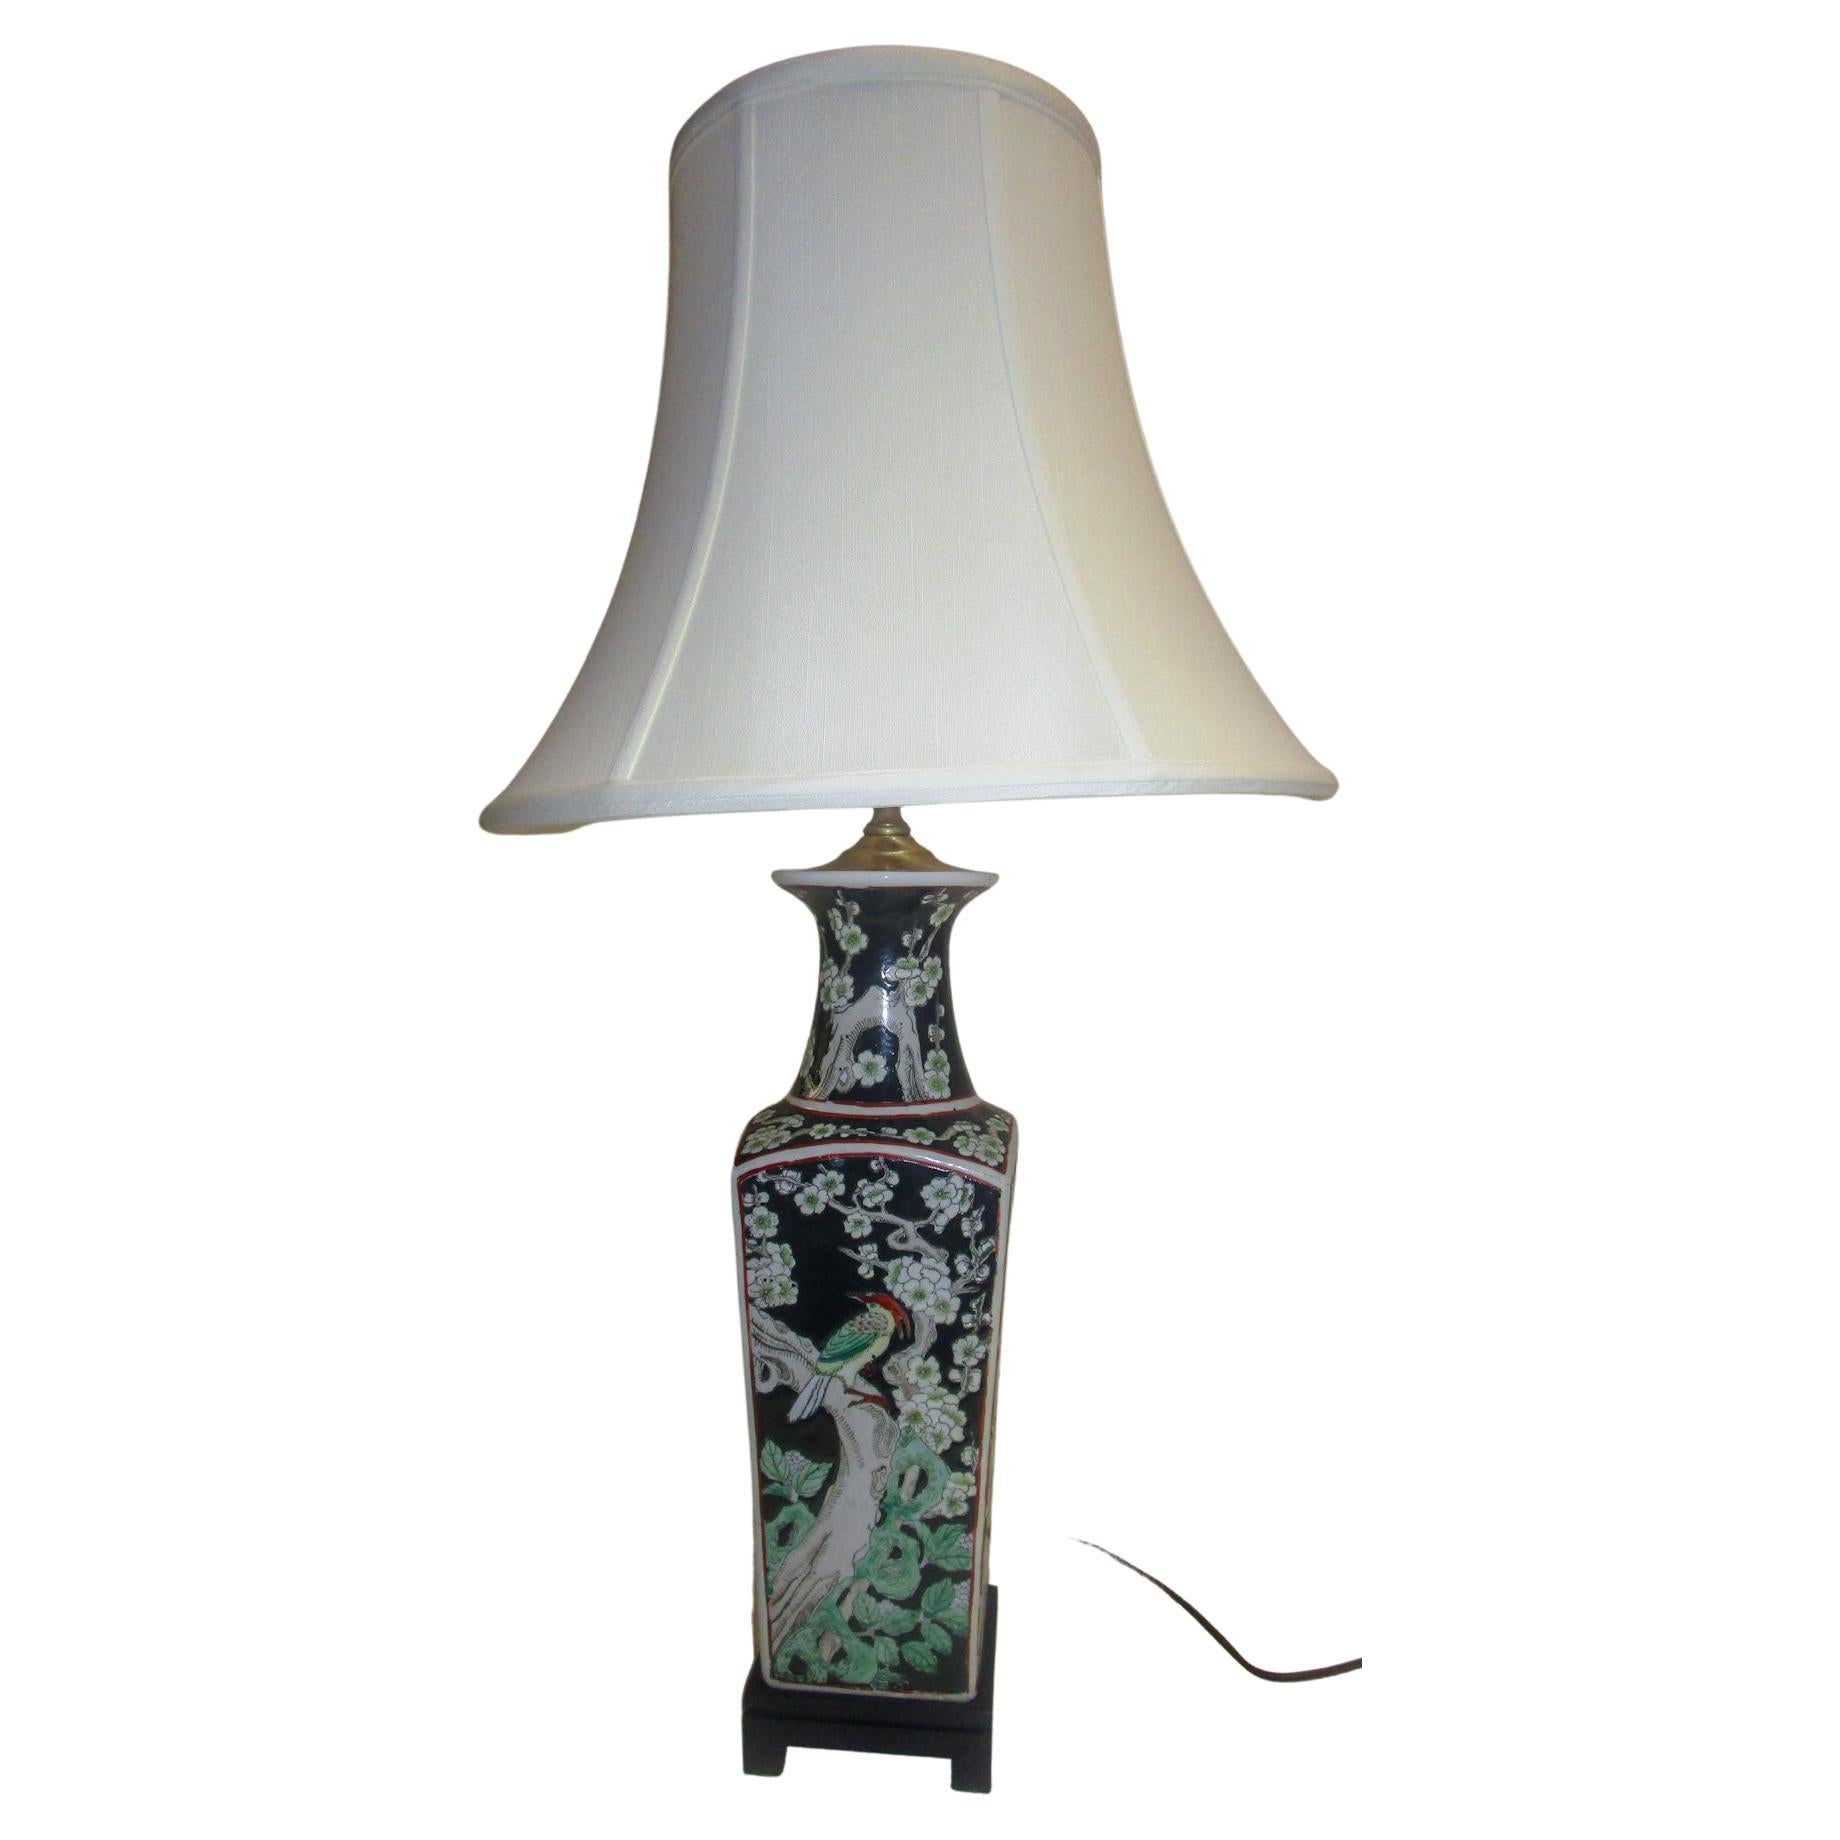 Chinese Export Black Ceramic Table Lamp with Floral and Bird Design